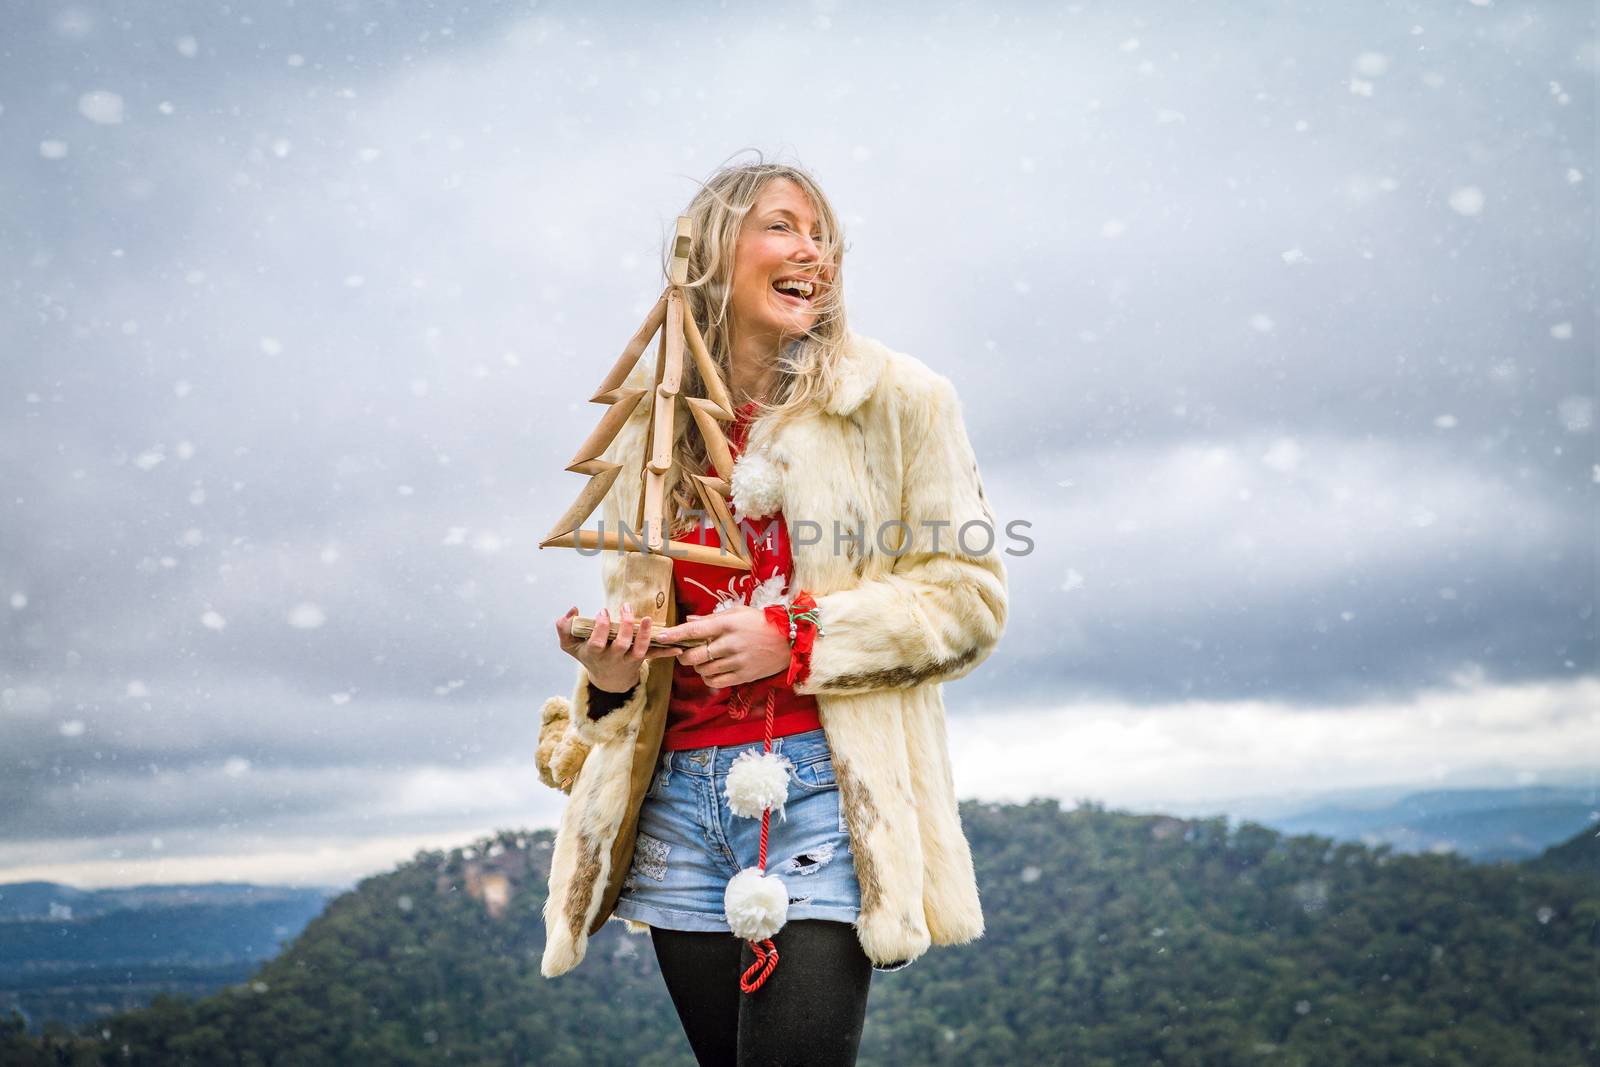 Woman holding Christmas items in snowy mountain scene by lovleah